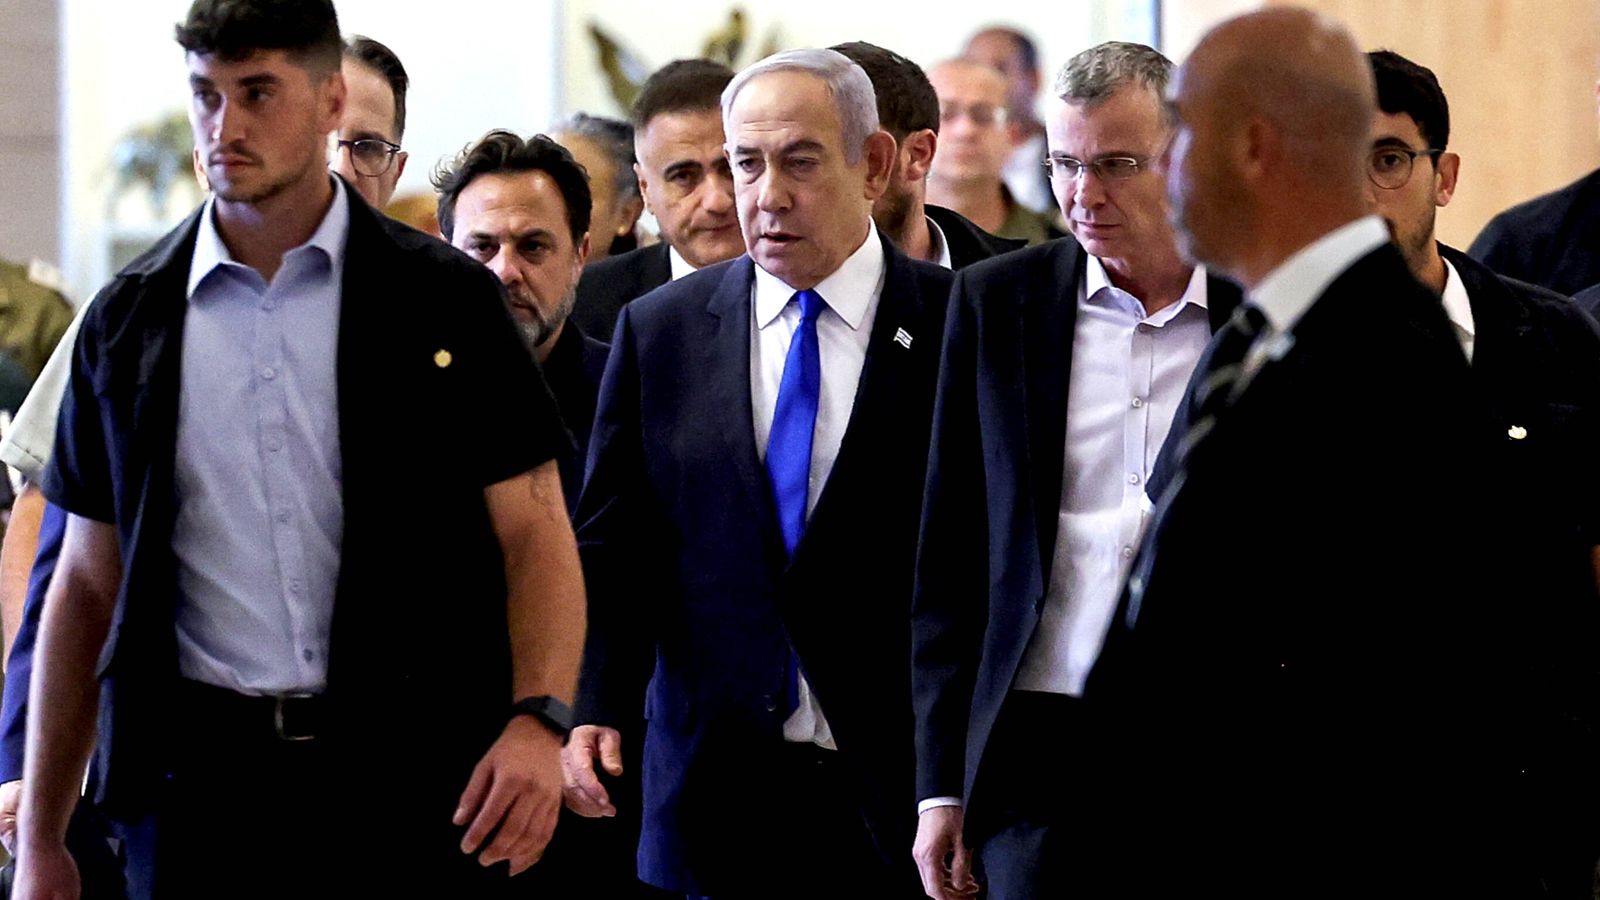 Benjamin Netanyahu given a label he will never shake by ICC as Israeli prime minister accused of 'war crimes'